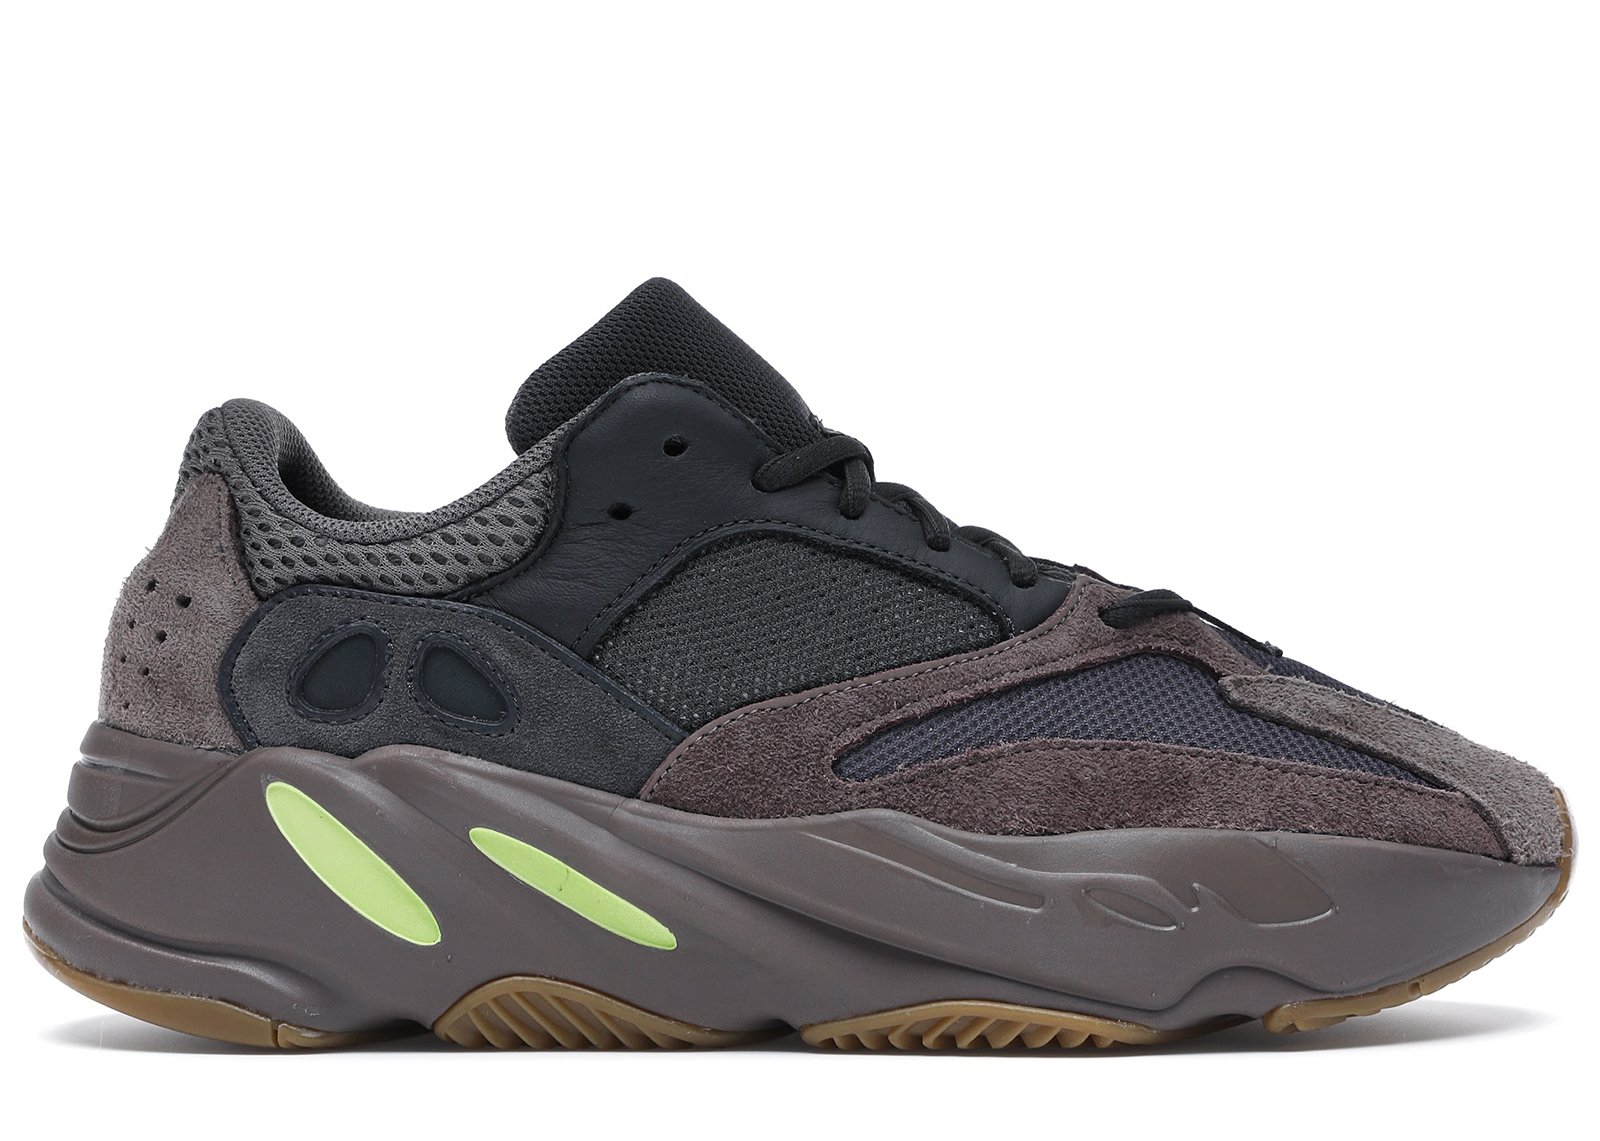 adidas Yeezy Boost 700 Mauve sneakers